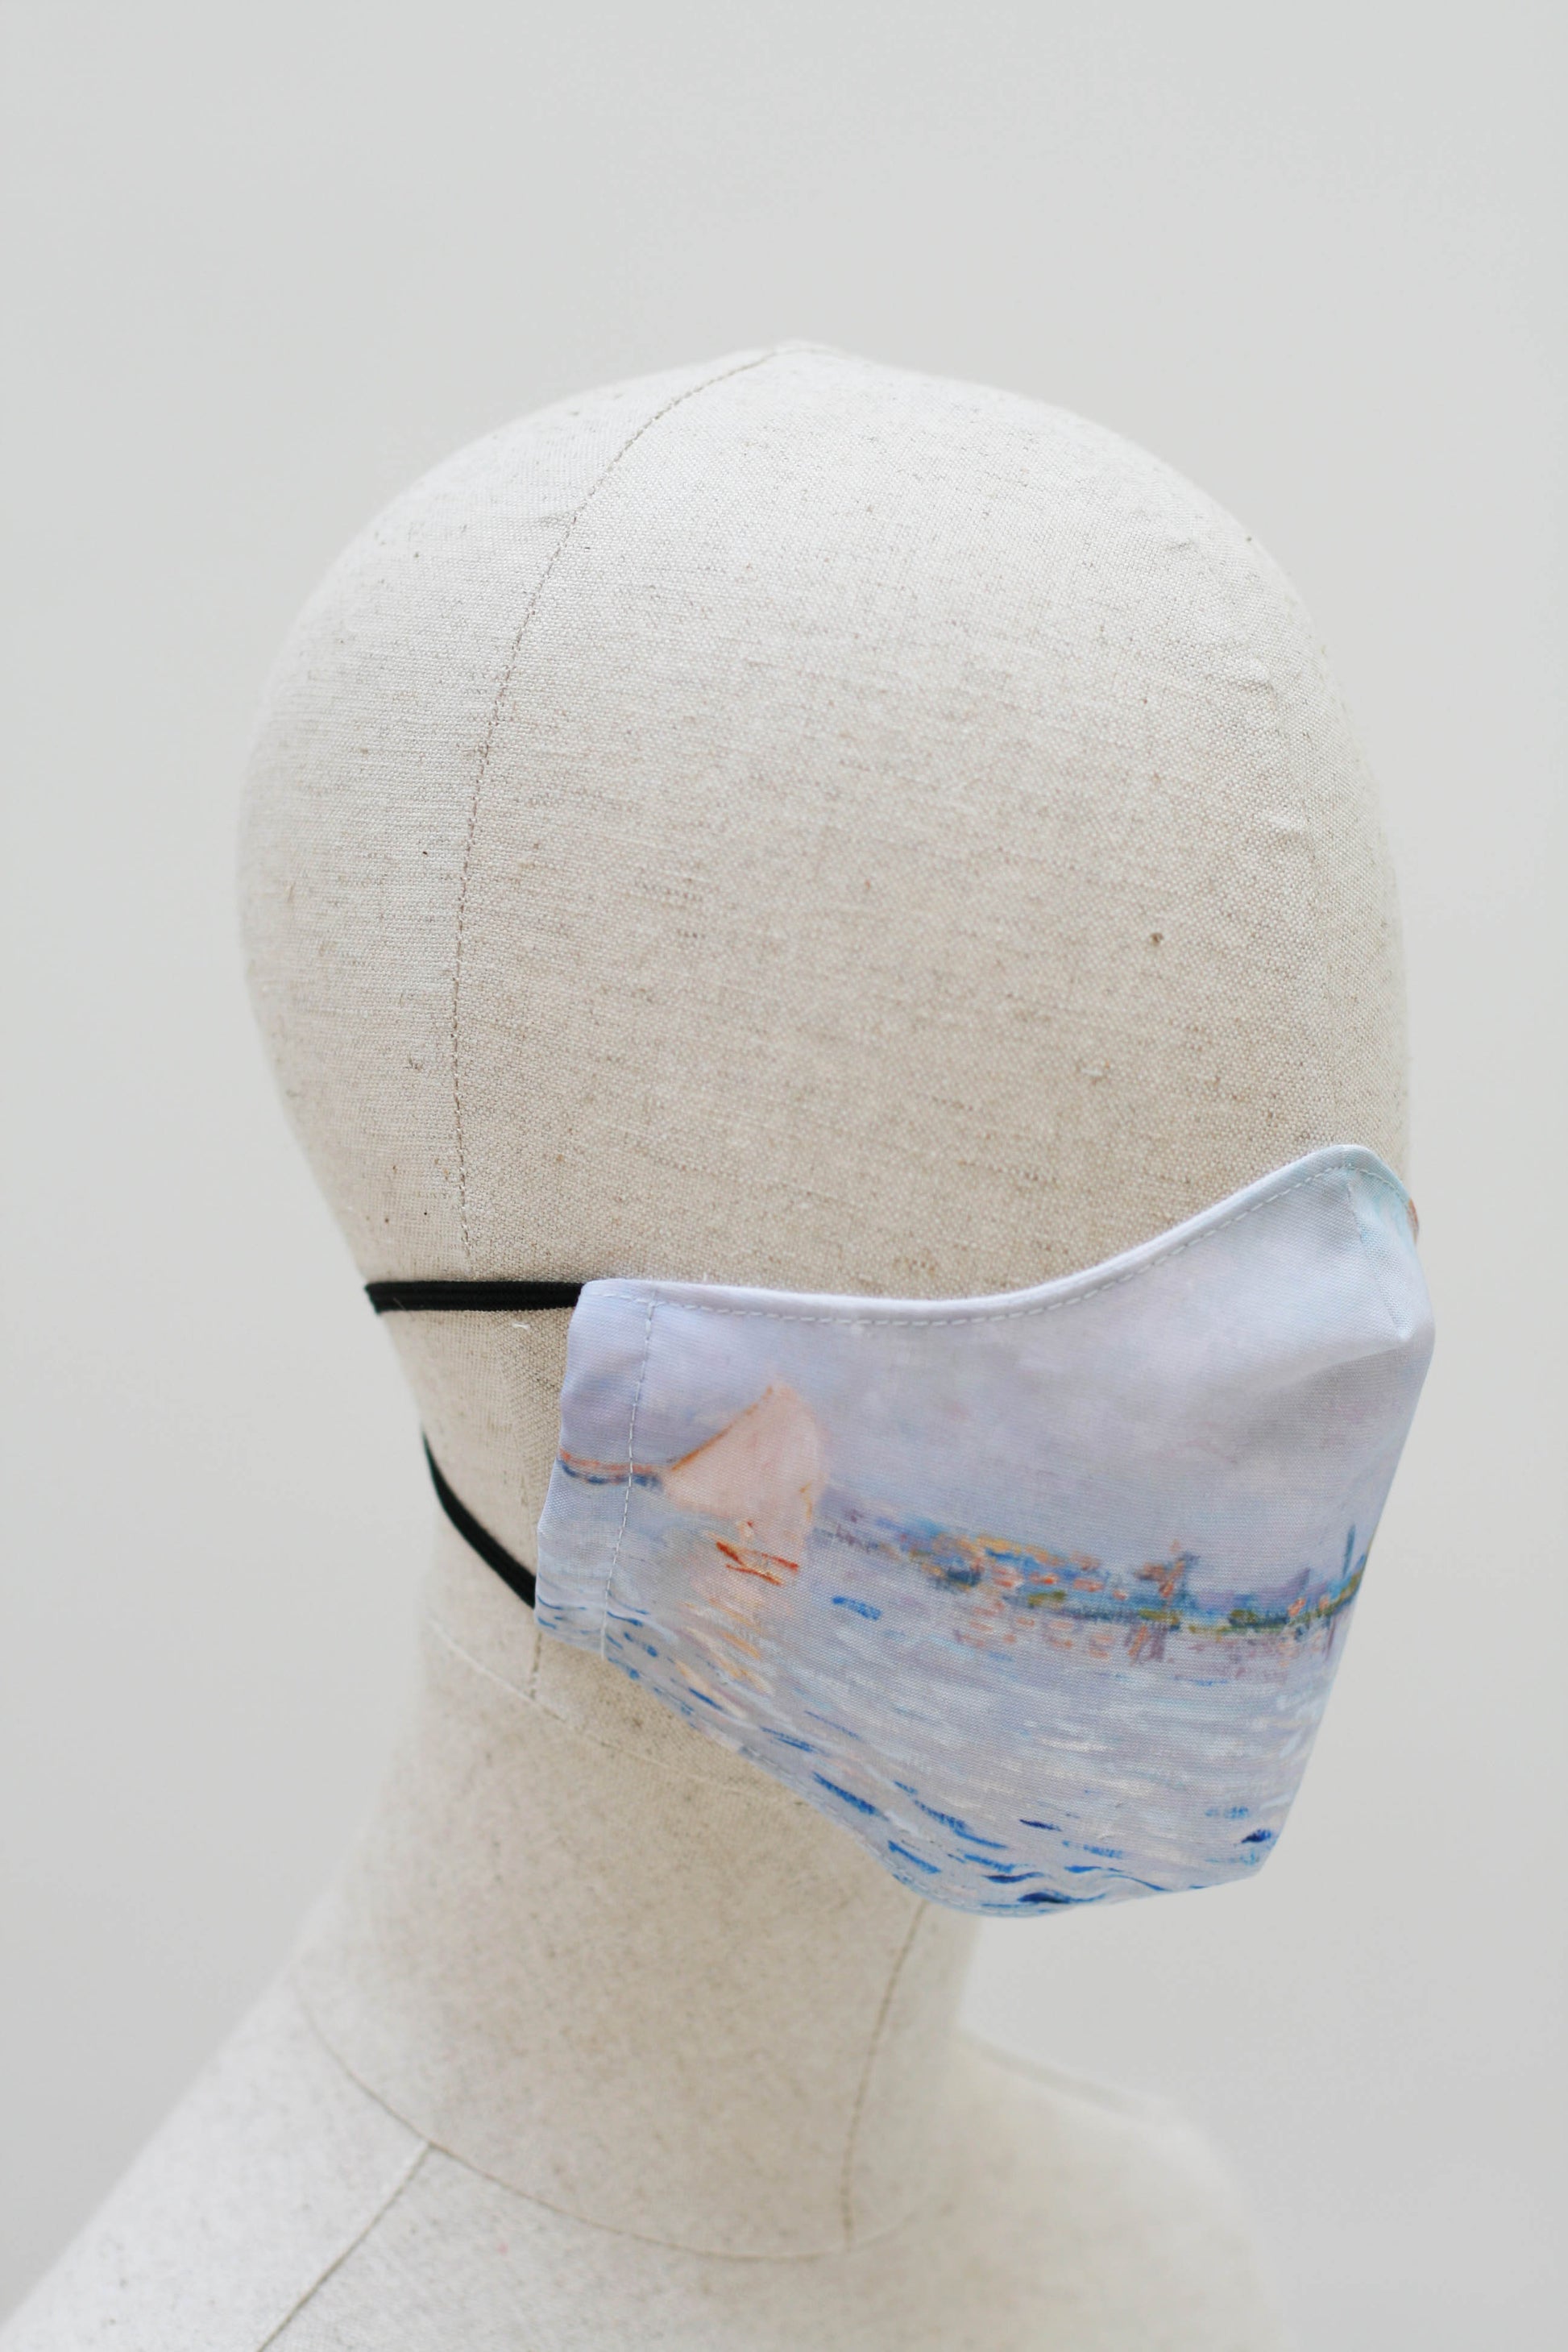 The mask on a mannequin head from the other side. The lake and sky continue with a single sailboat, its white sails open, towards the edge of the mask.